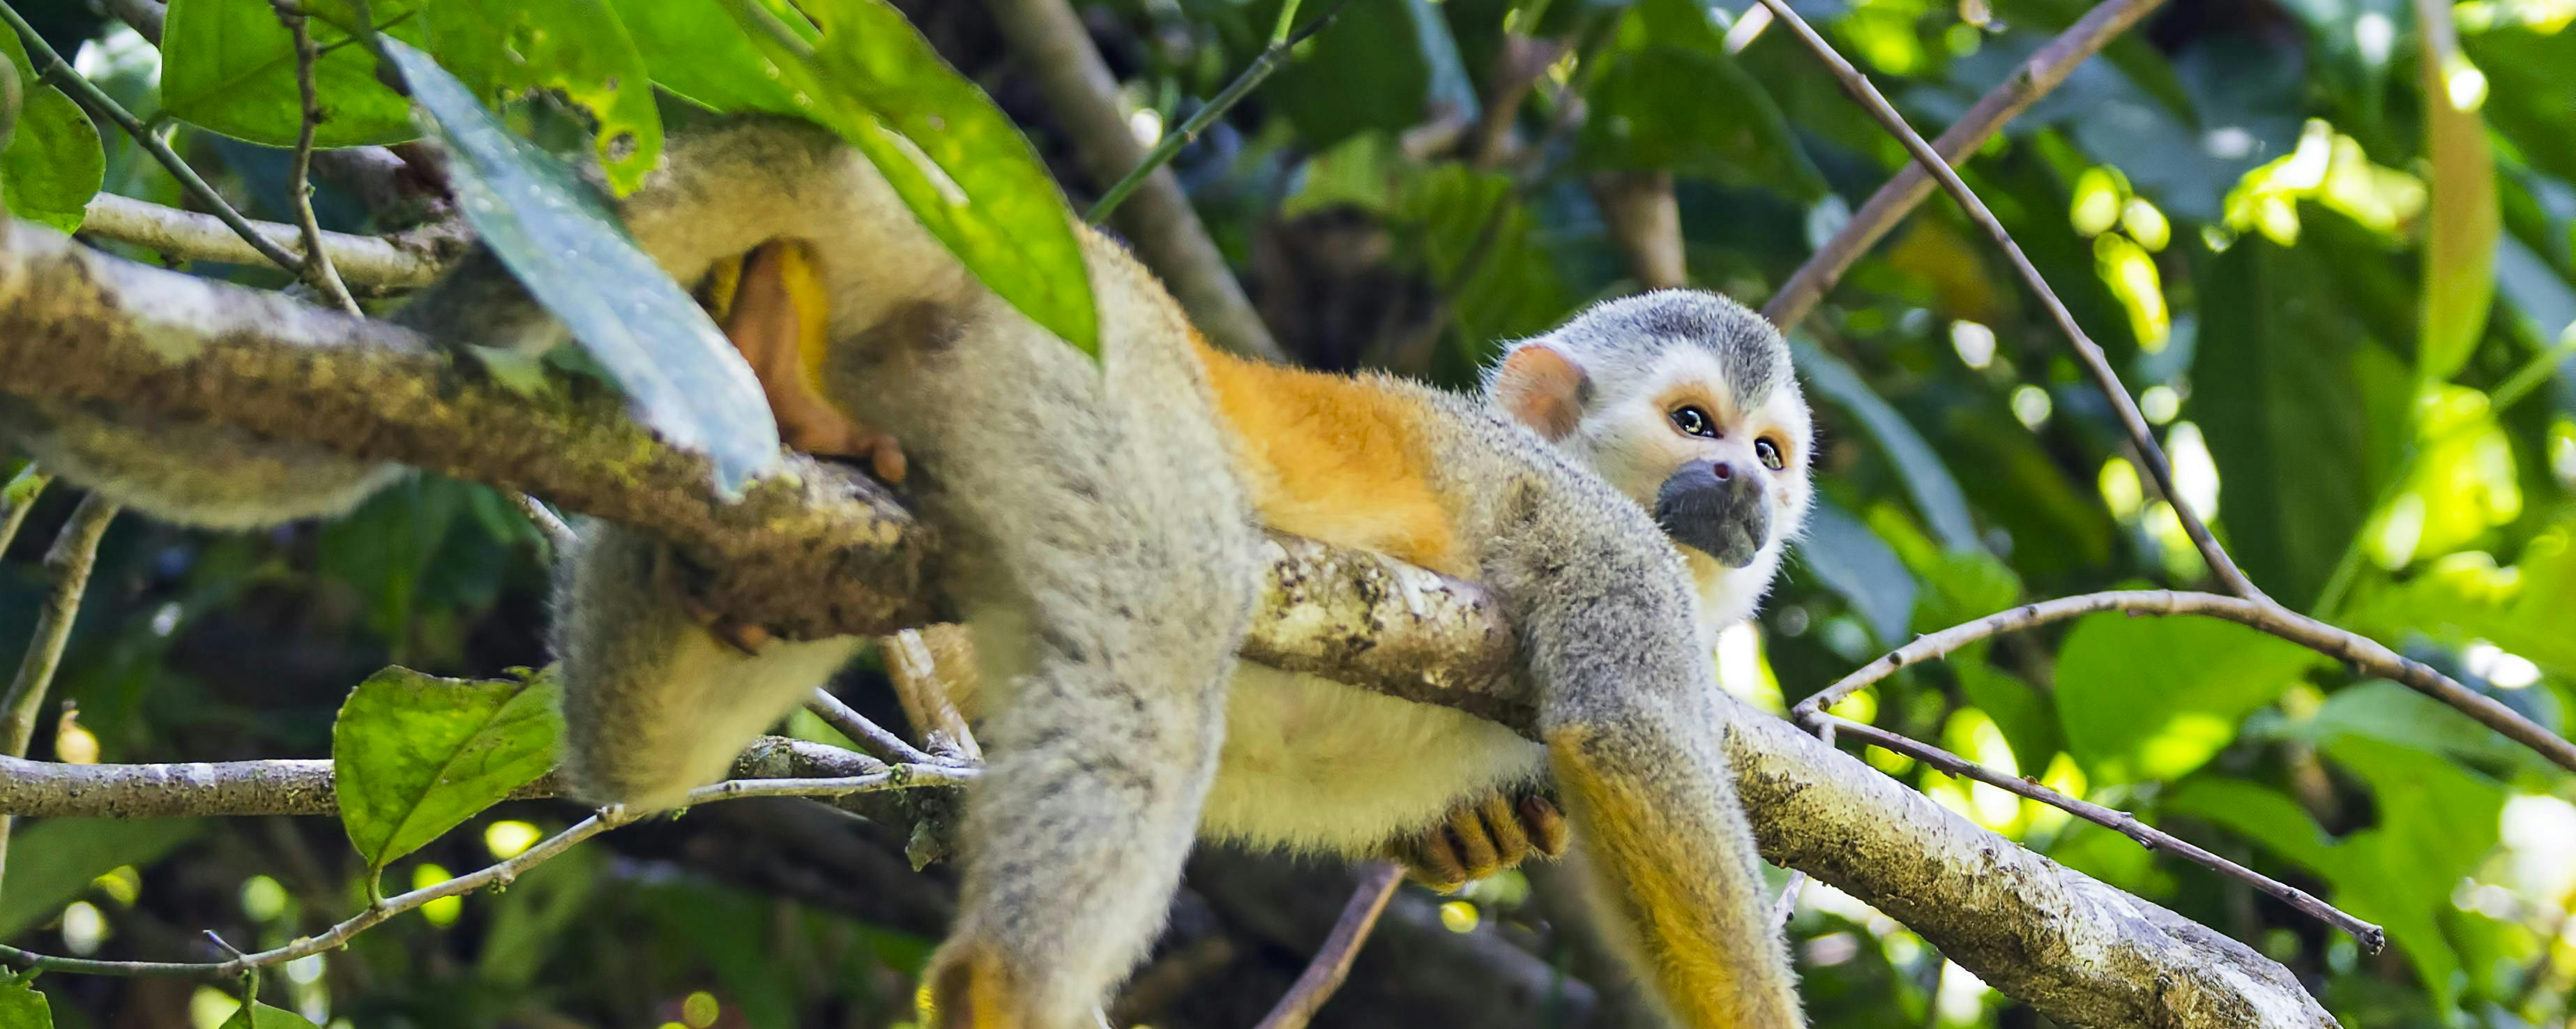 5 reasons you’ll want to visit Costa Rica